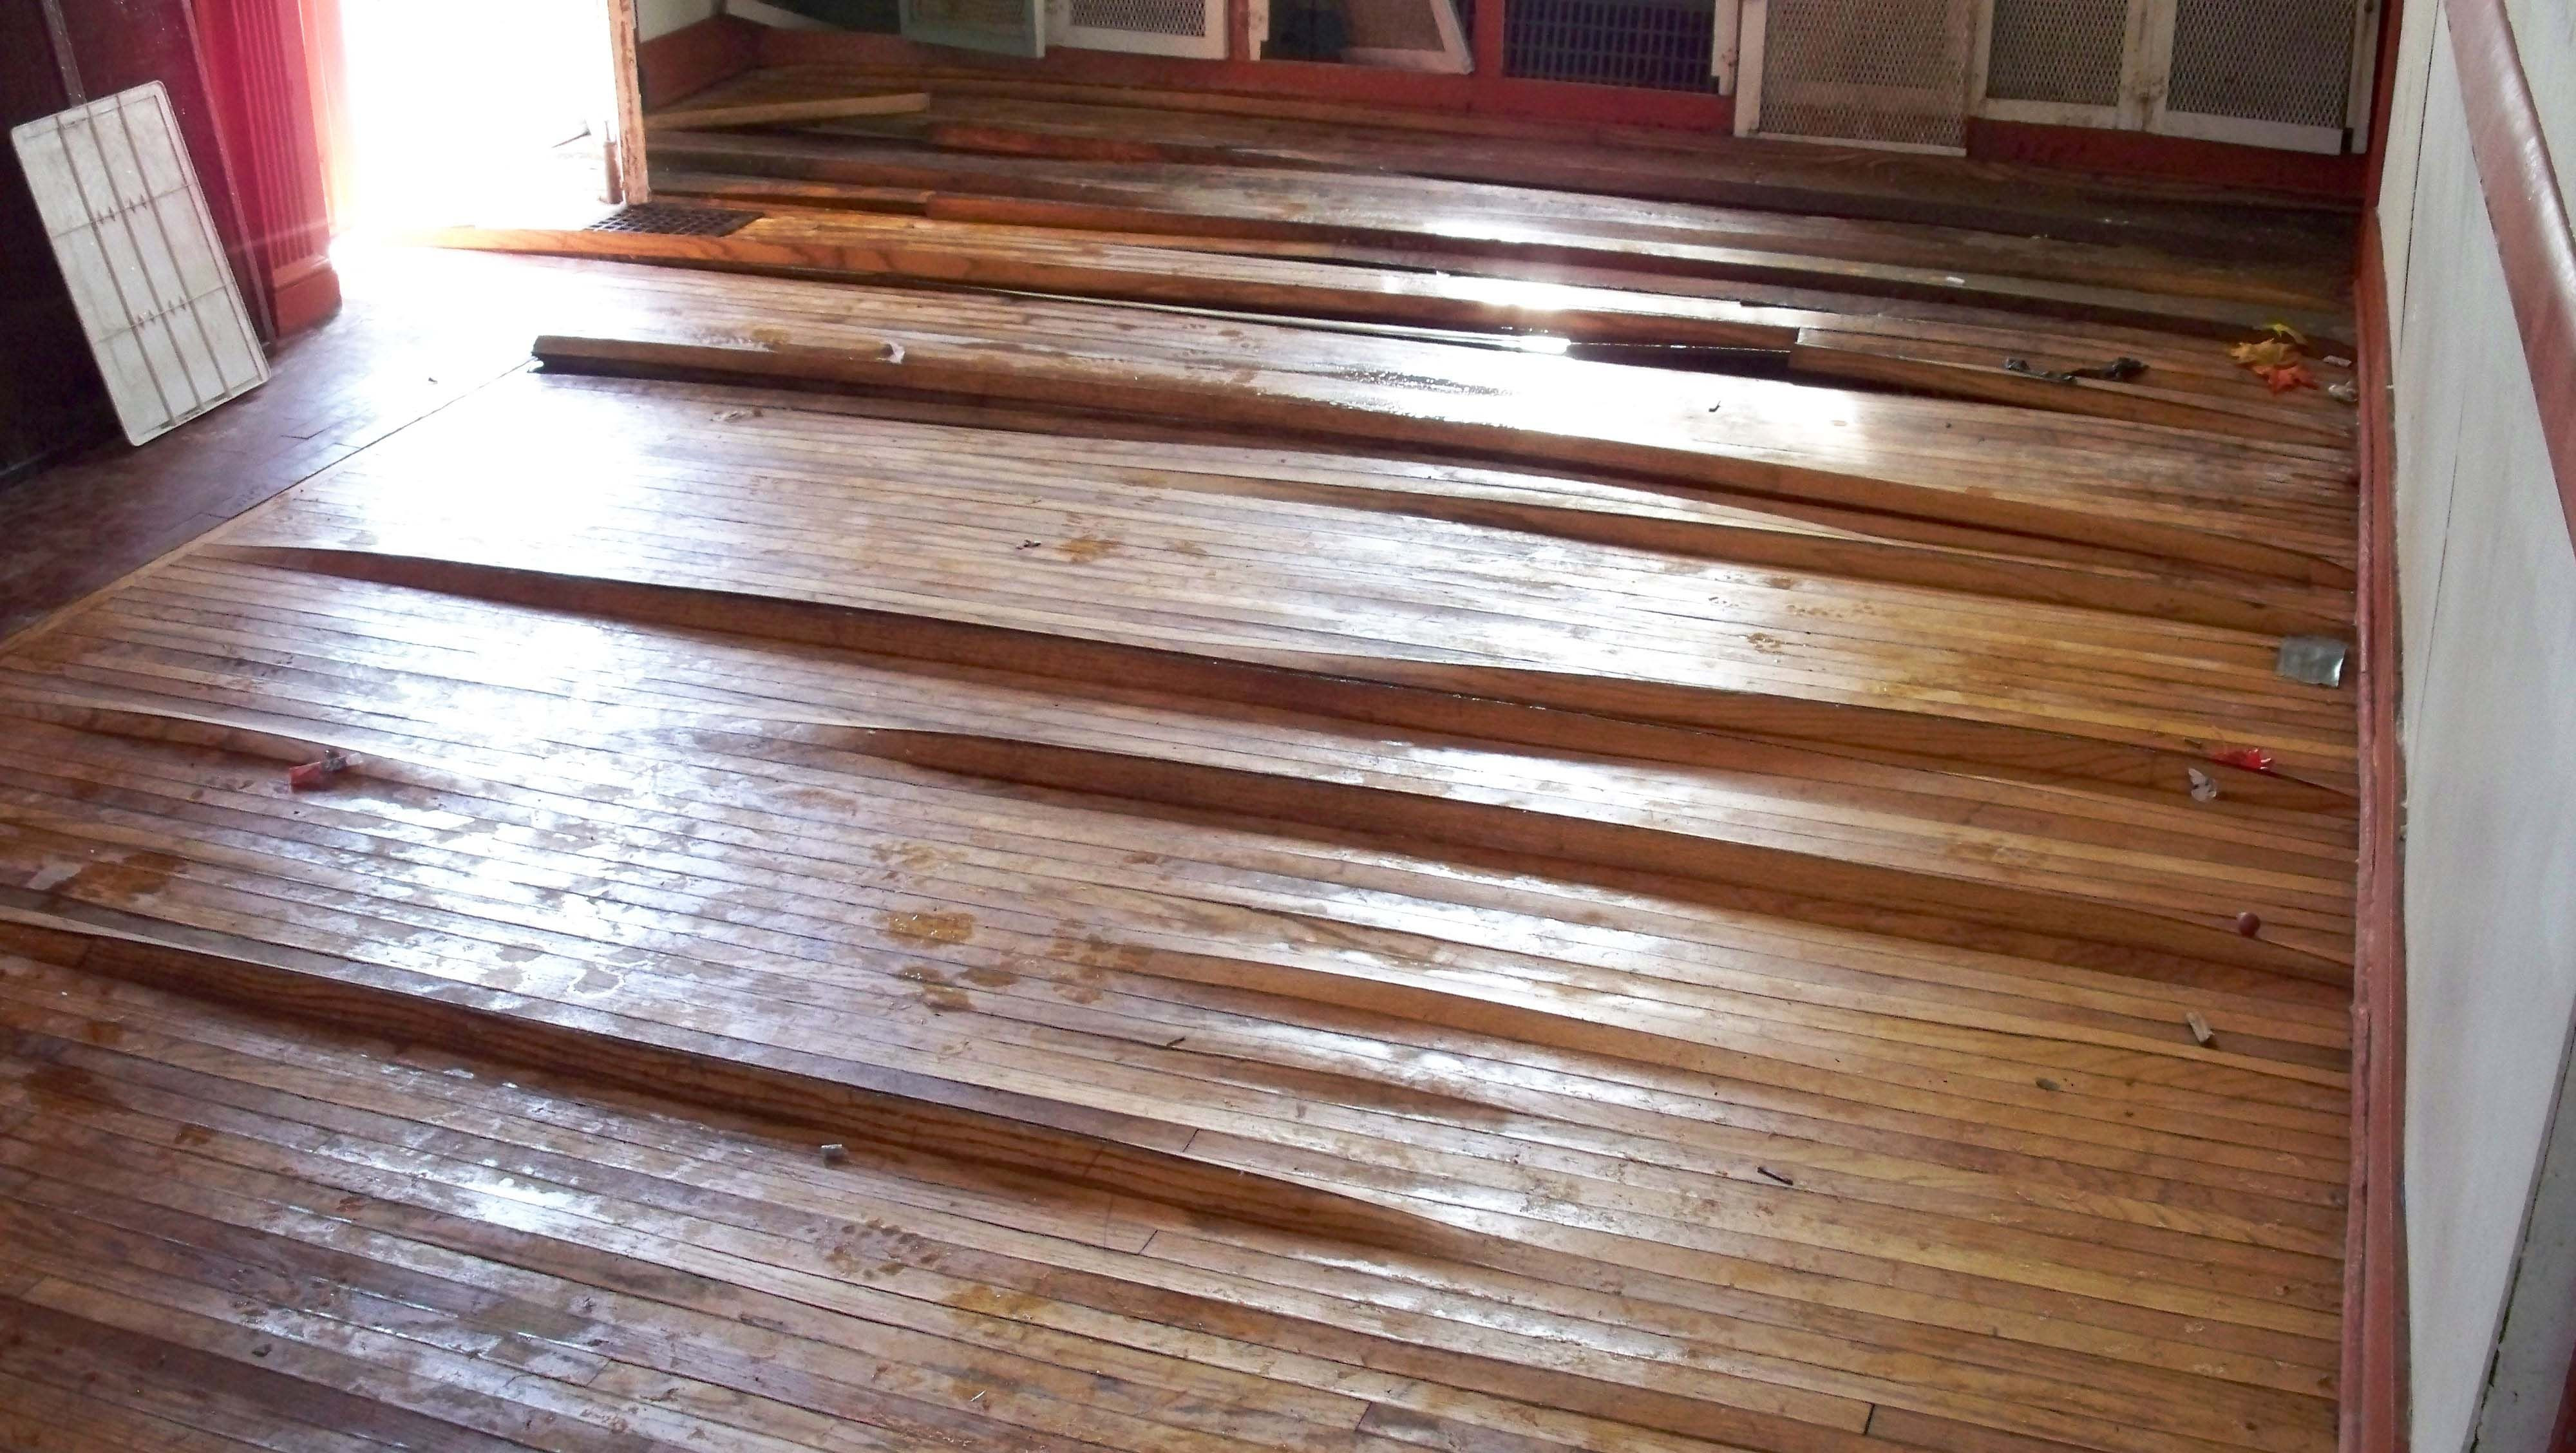 20 Great Can You Install solid Hardwood Floors On Concrete 2024 free download can you install solid hardwood floors on concrete of hardwood floor water damage warping hardwood floors pinterest with hardwood floor water damage warping